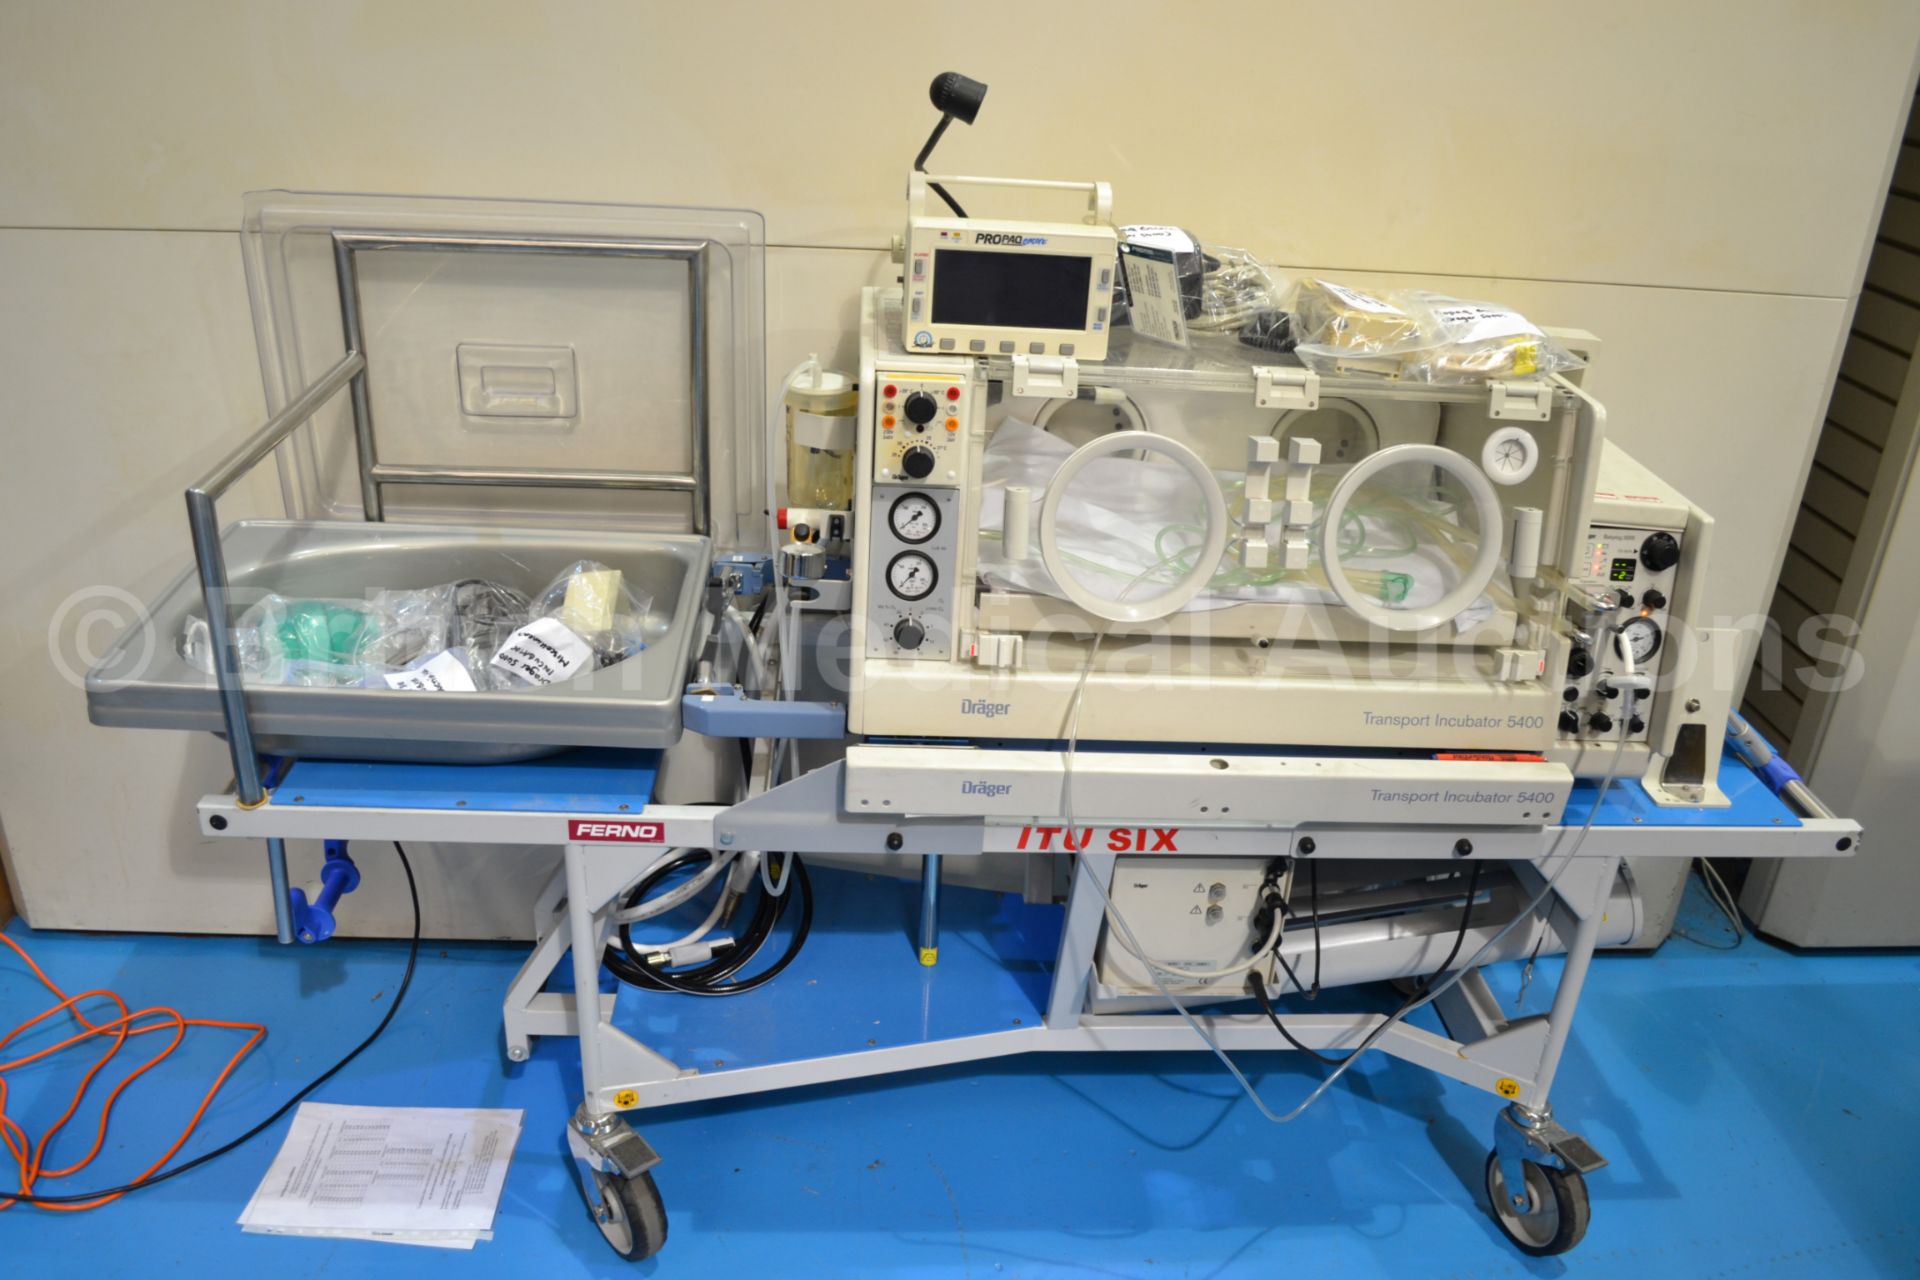 Drager Transport Incubator 5400 with Hoses, Drager - Image 3 of 7